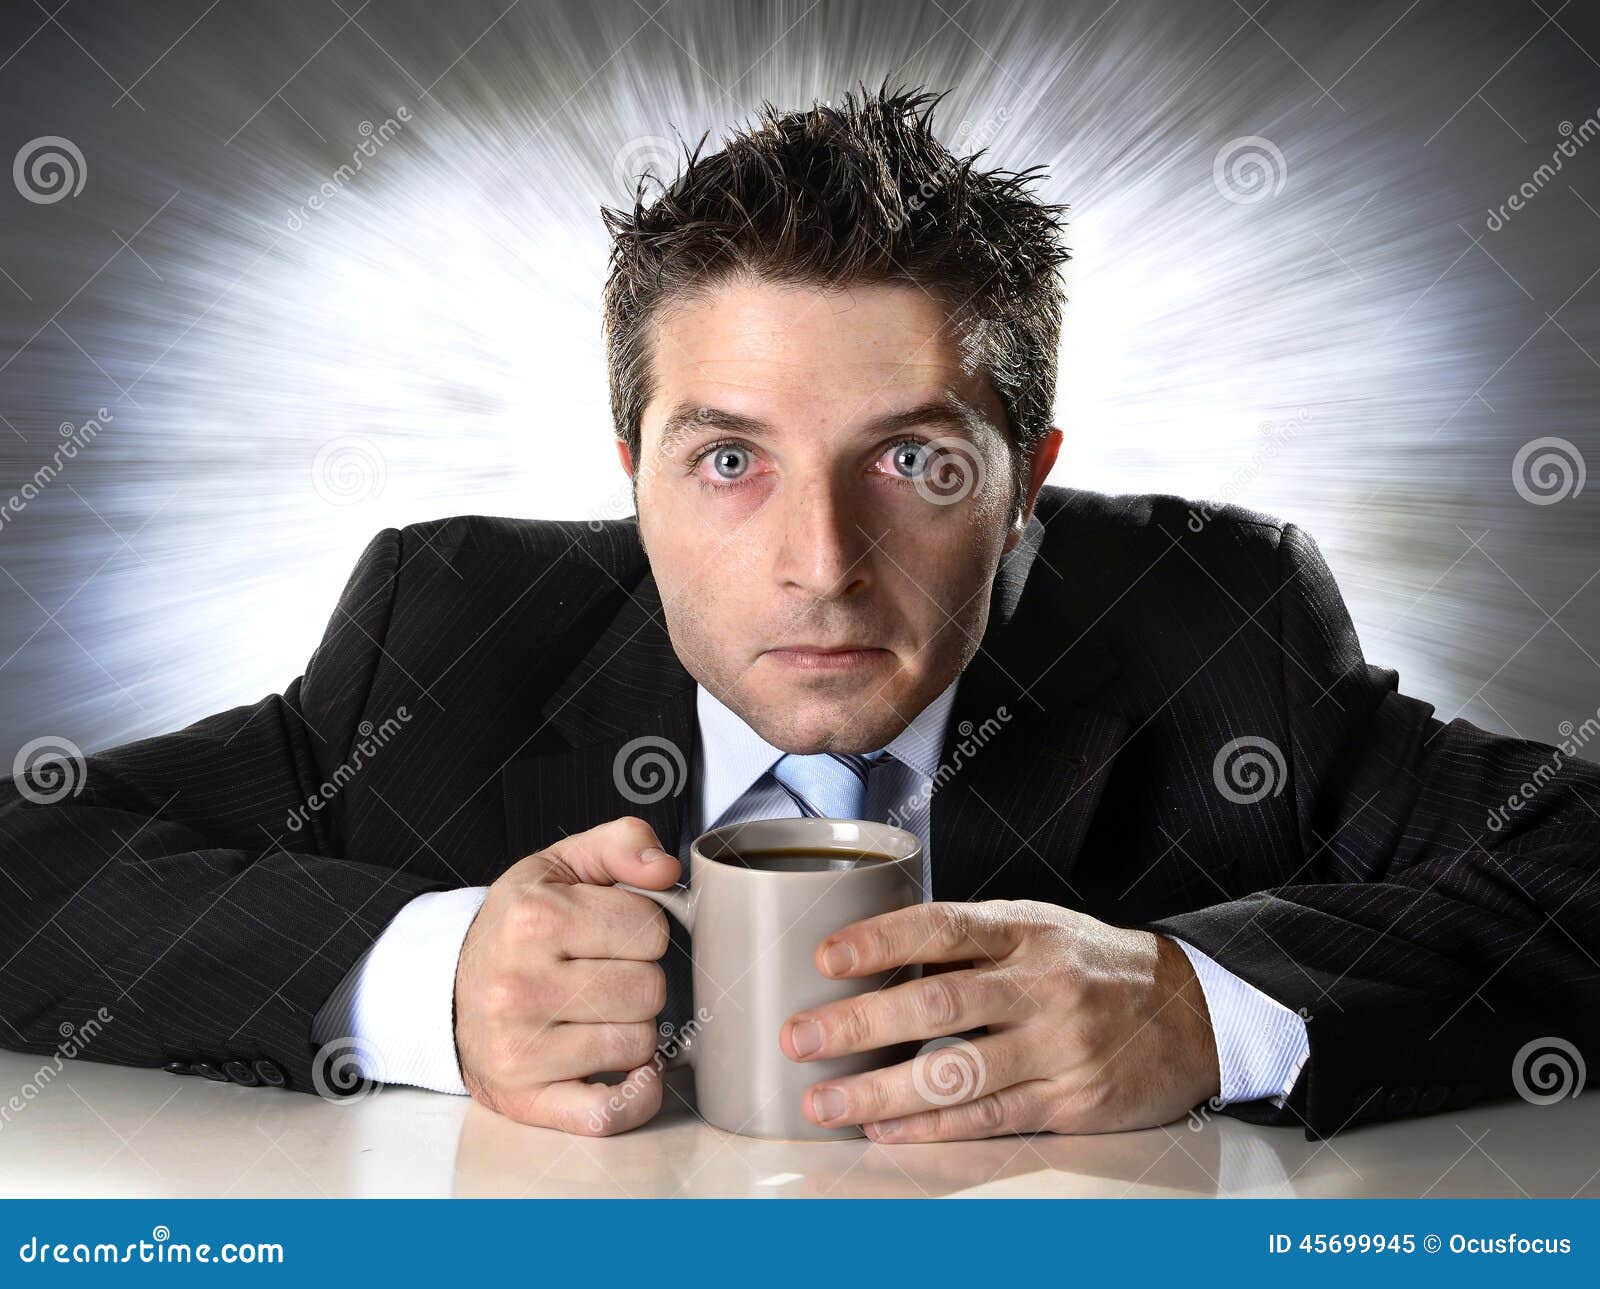 addict businessman holding cup of coffee anxious and crazy in caffeine addiction